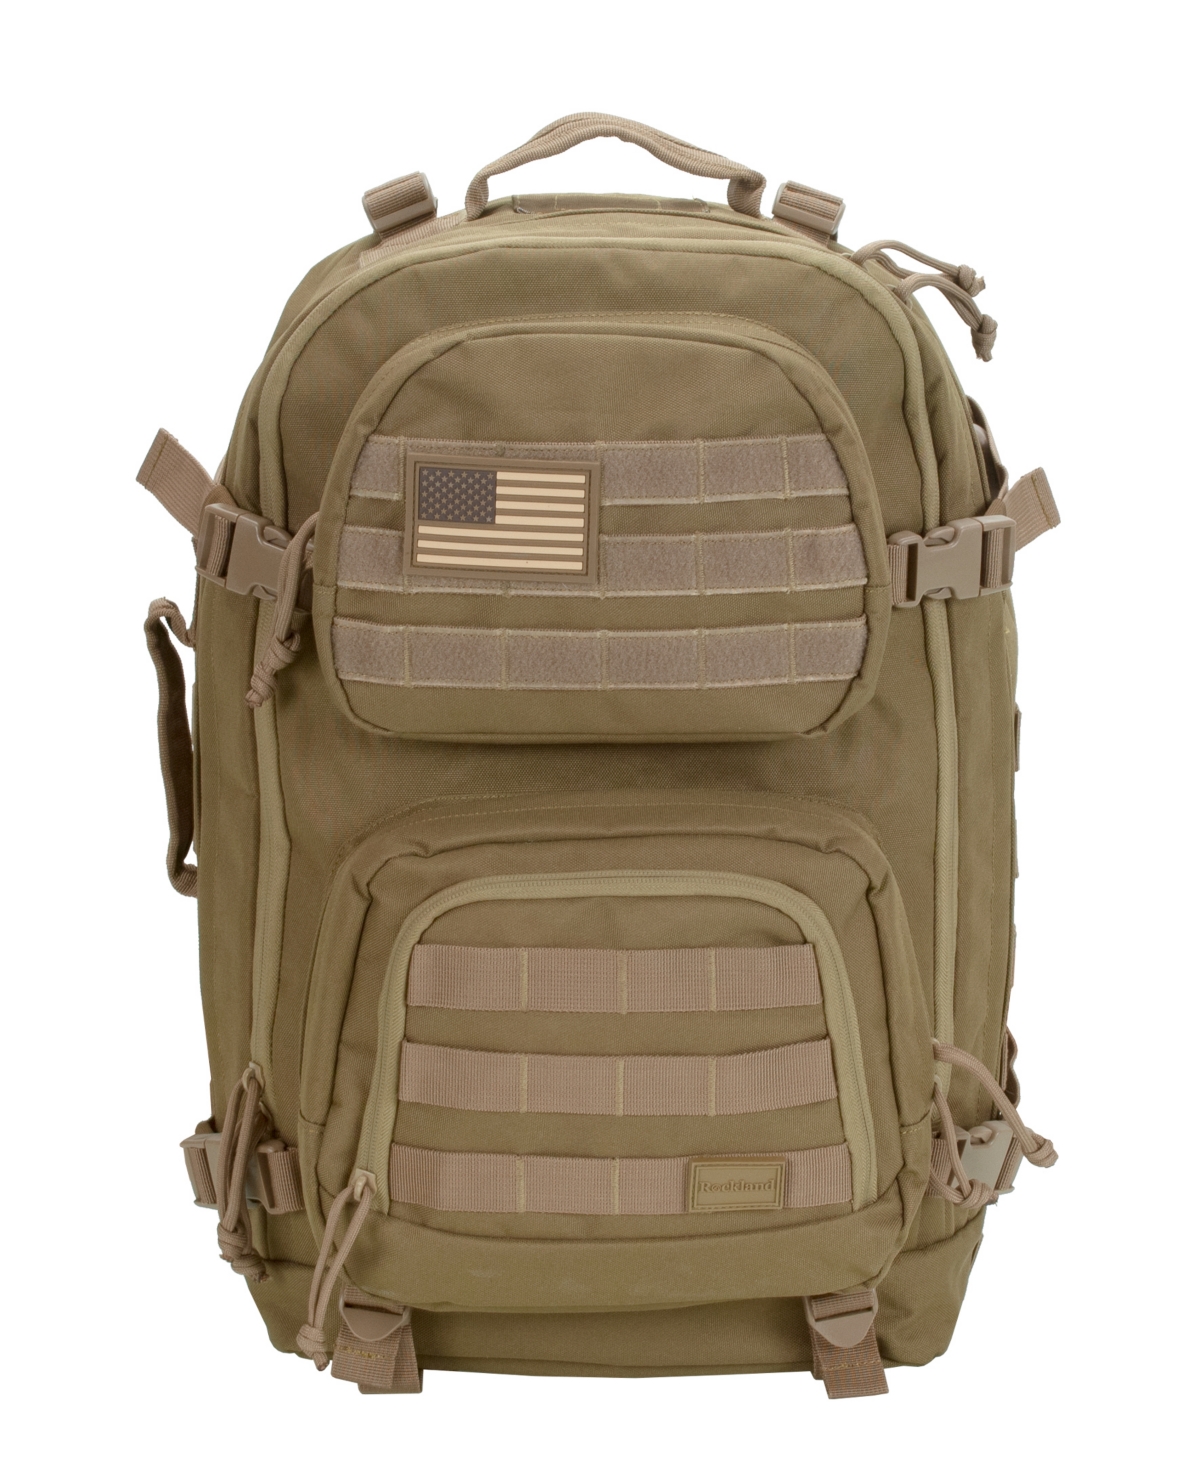 Military Tactical Laptop Backpack - Tan